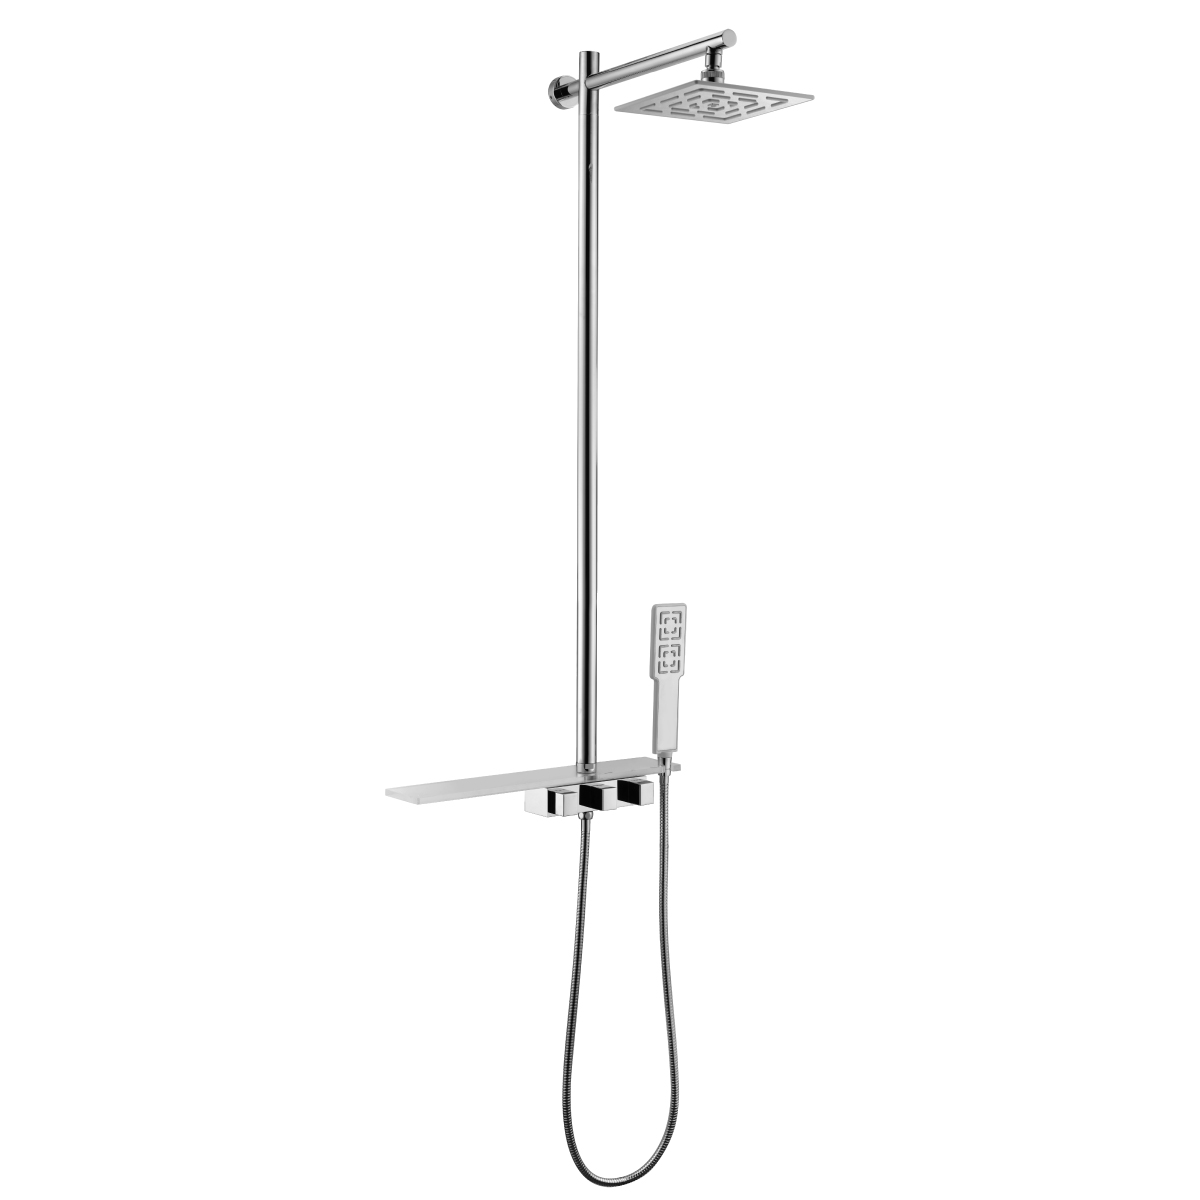 LM7001C Shower faucet with non-adjustable rod height and «Tropical rain» shower head